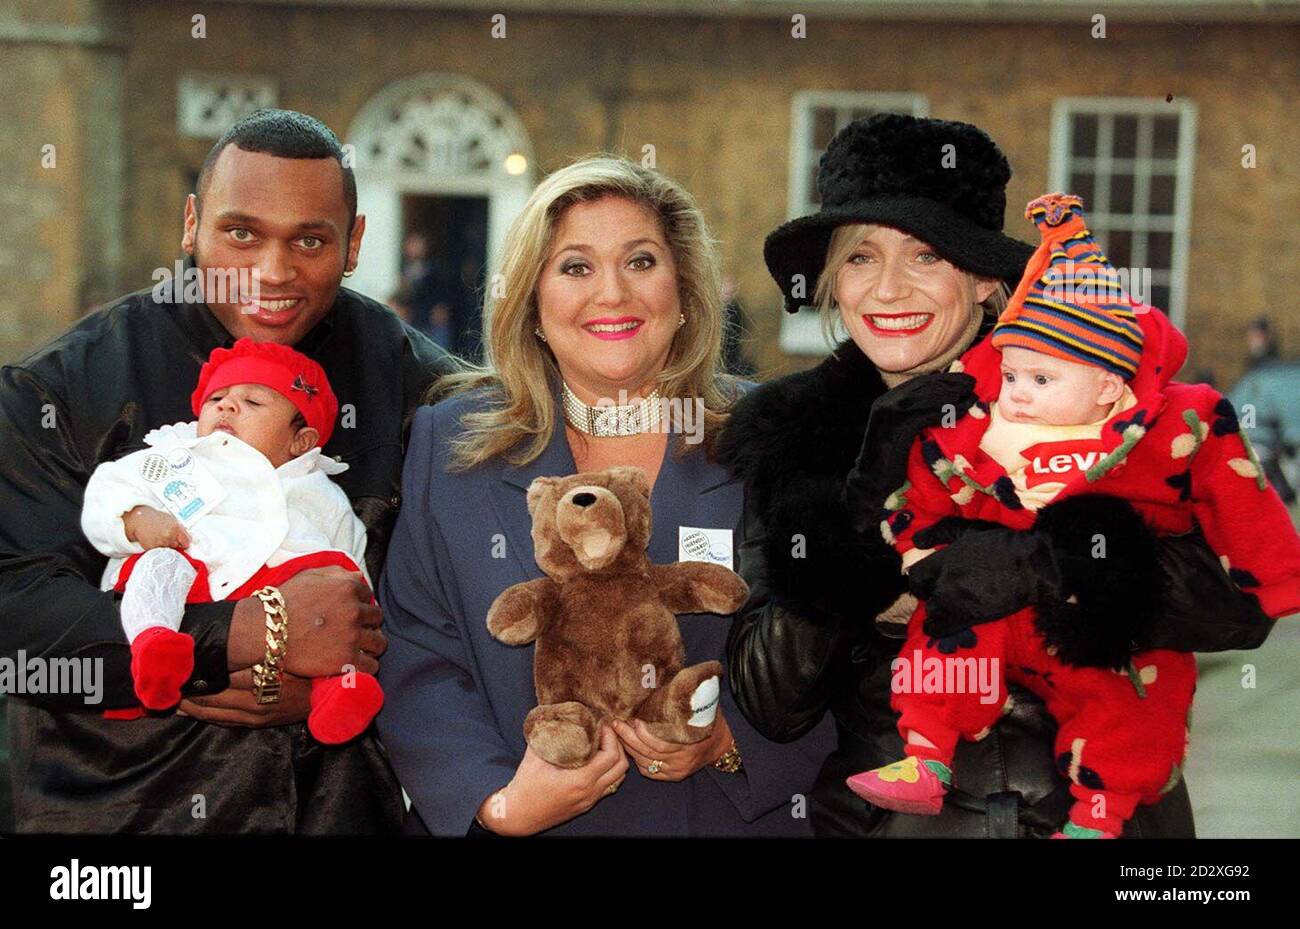 (l/r) Gladiator Rhino (Mark Smith) and his daughter Chloe, TV presenter Vanessa Feltz and former EastEnders star Michelle Collins and her daughter Maia, launch the Tommy's Campaign and Huggies 1997 Parent Friendly Awards in London today (Thursday). Two million voting forms will be available through retail and leisure outlets nationwide from today, asking parents to vote for those shops, restaurants and leisure organisations which provide the most genuinely parent friendly facilities. Voting ends on February 14, 1997 and the winners of the 1997 Parent Friendly Awards will be announced on Thursd Stock Photo